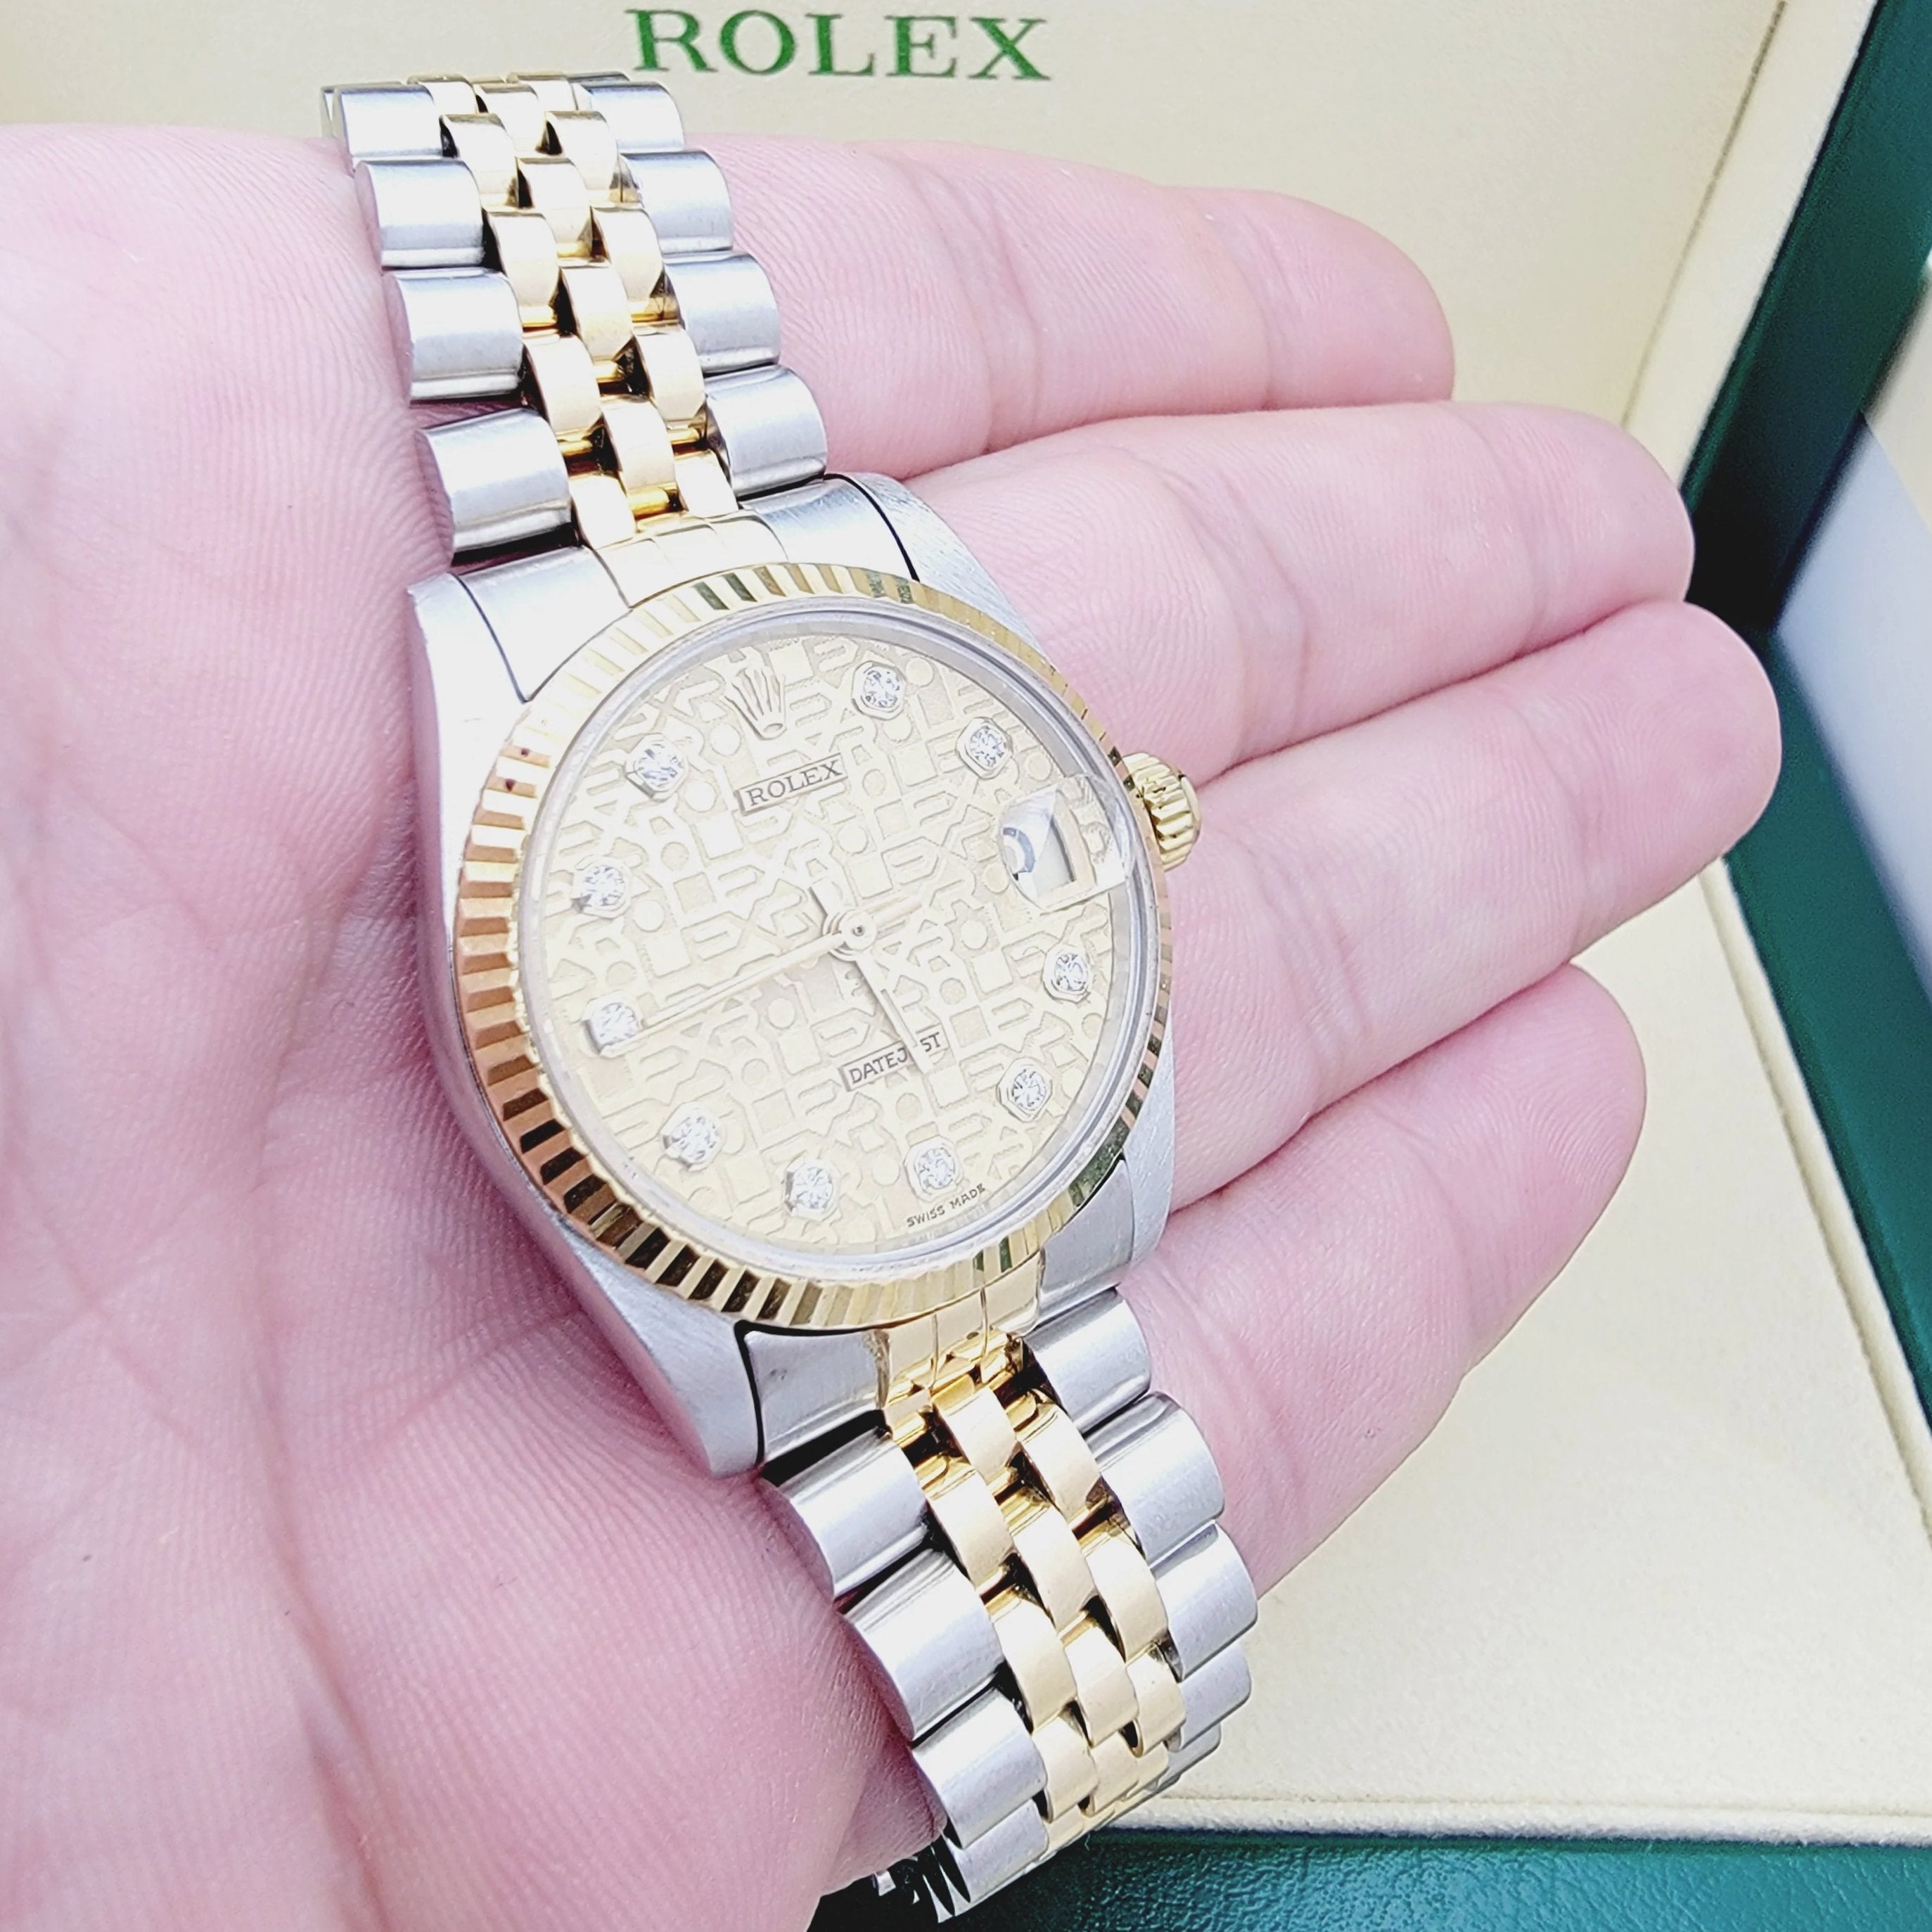 Ladies Rolex Midsize 31mm DateJust Two Tone 18K Yellow Gold / Stainless Steel Wristwatch w/ Hologram Diamond Dial & Fluted Bezel. (Pre-Owned 68273)